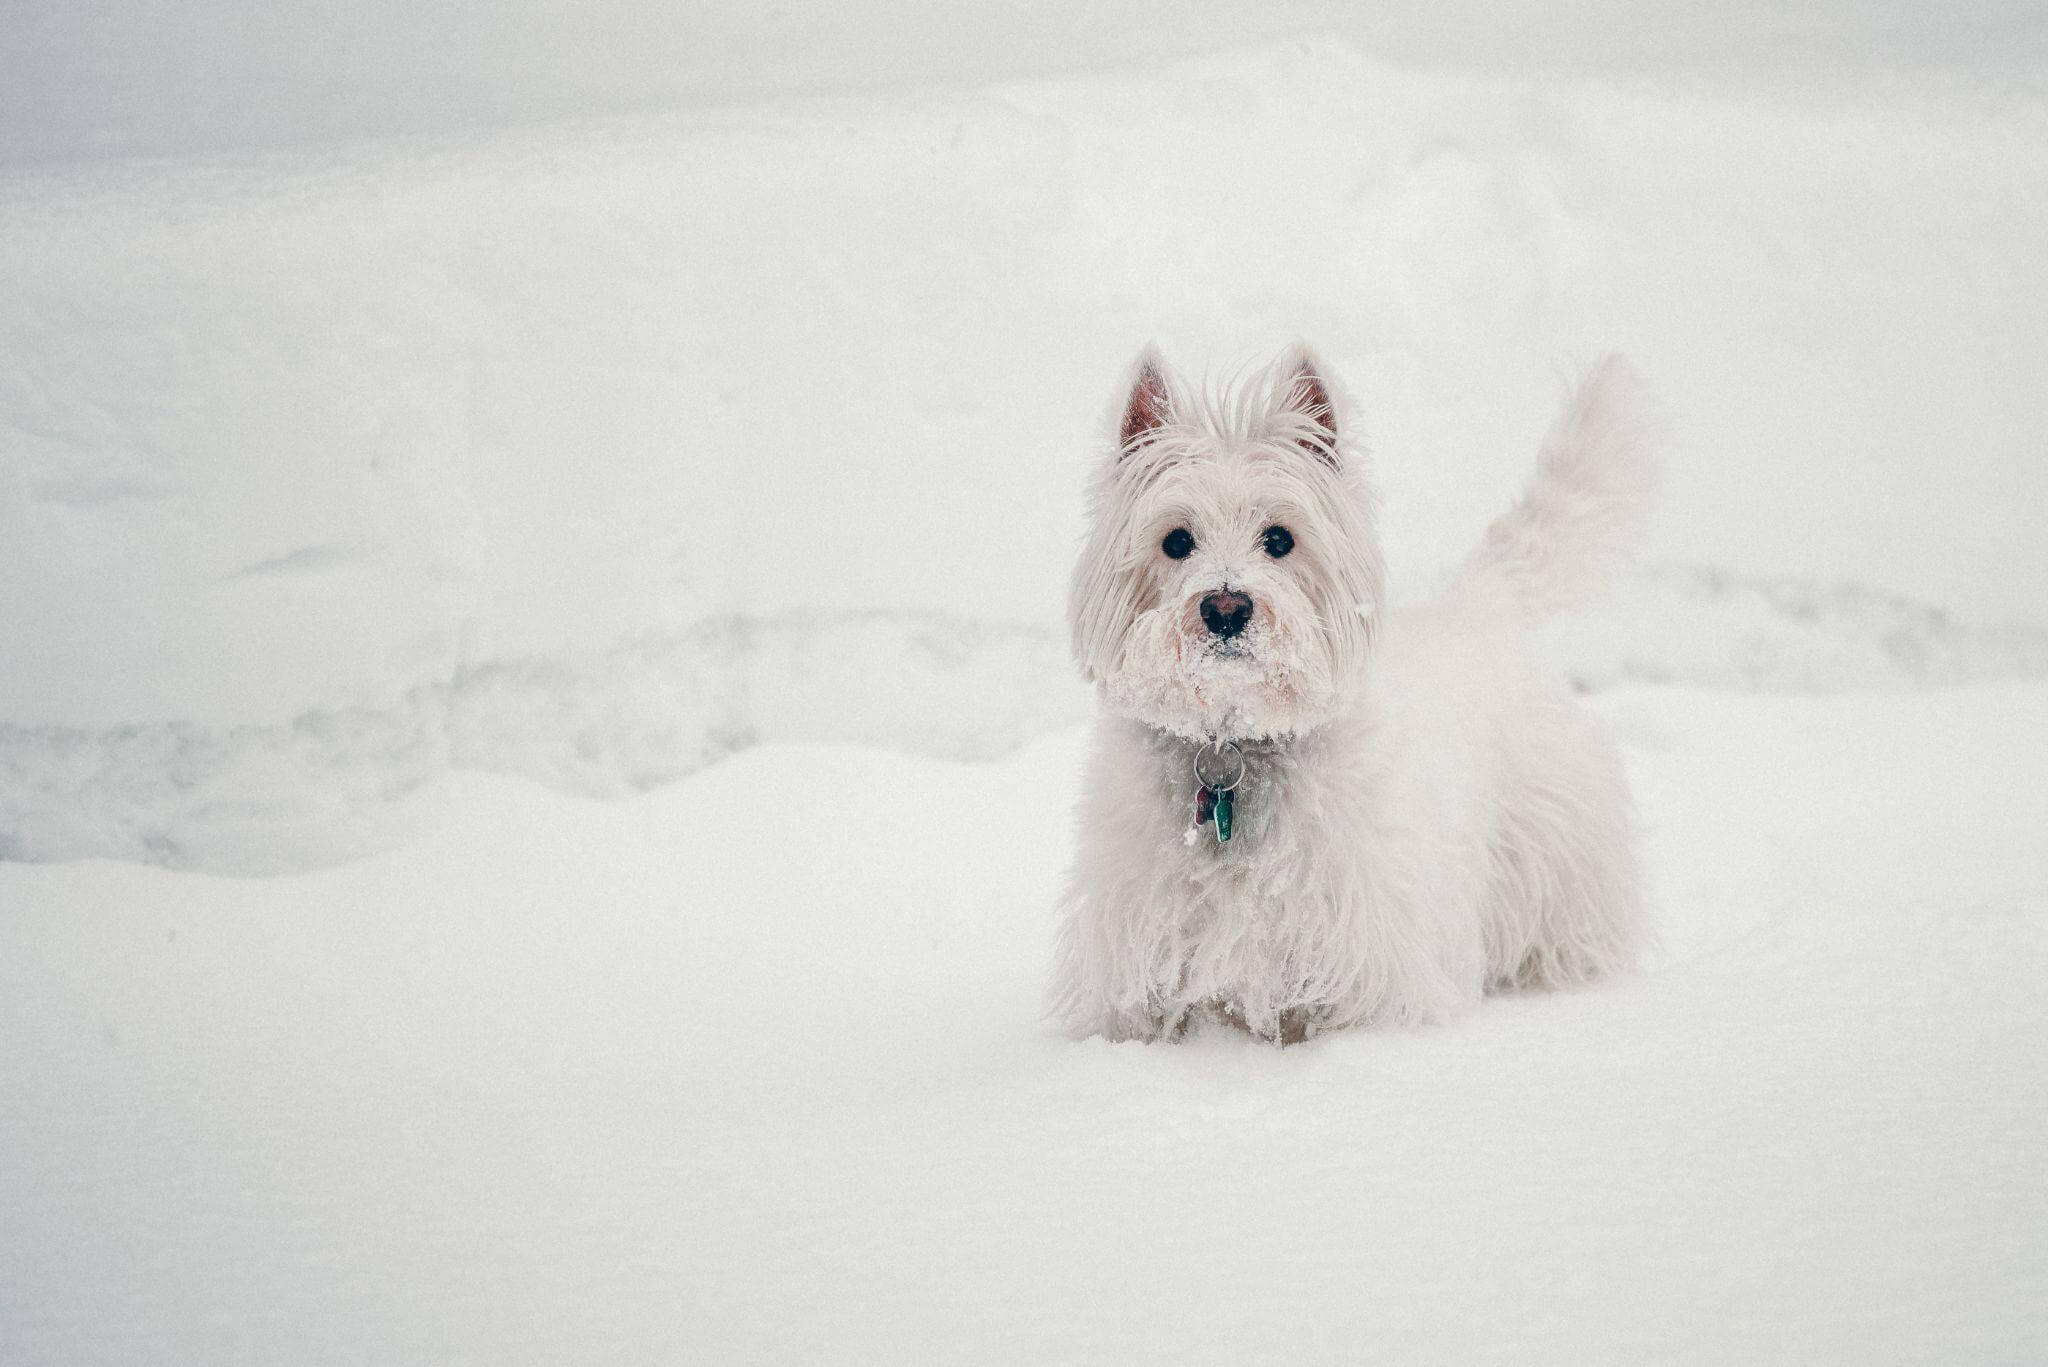 Keeping Your Pet Active As Cold Weather Continues